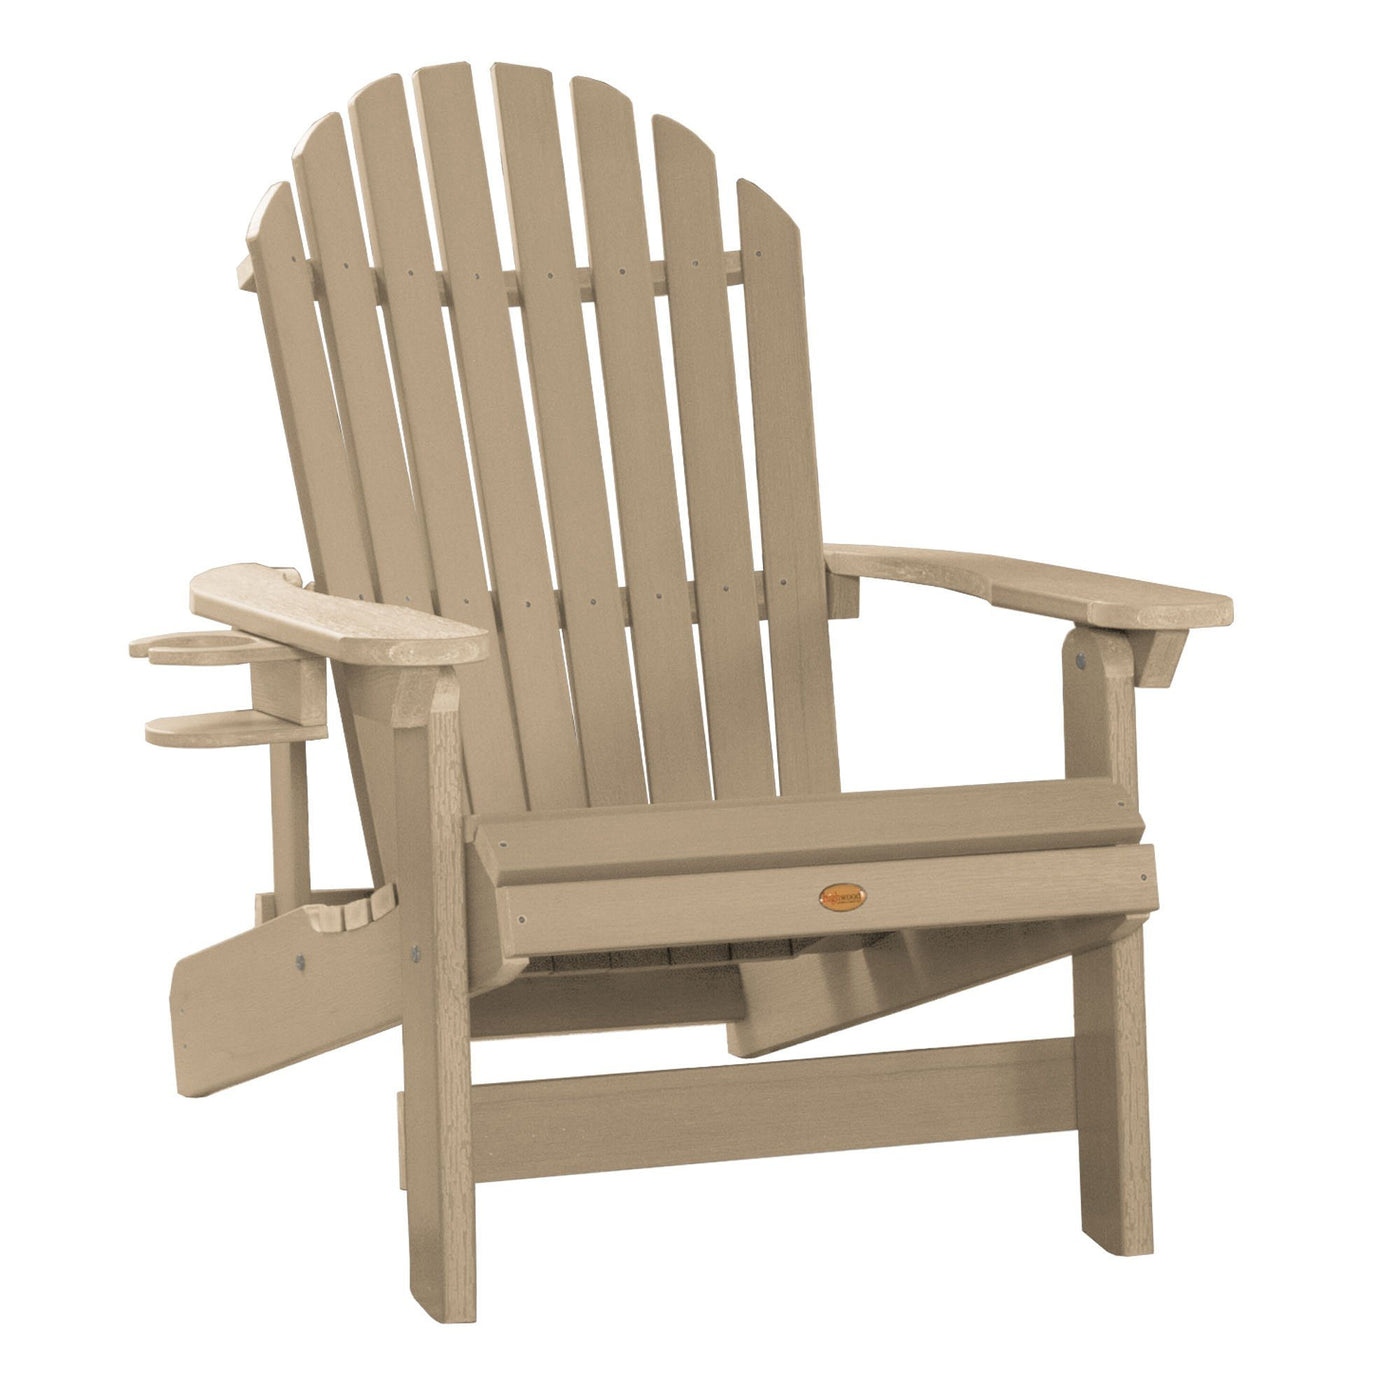 1 King Hamilton Folding and Reclining Adirondack Chair with 1 Easy-add Cup Holder Highwood USA Tuscan Taupe 